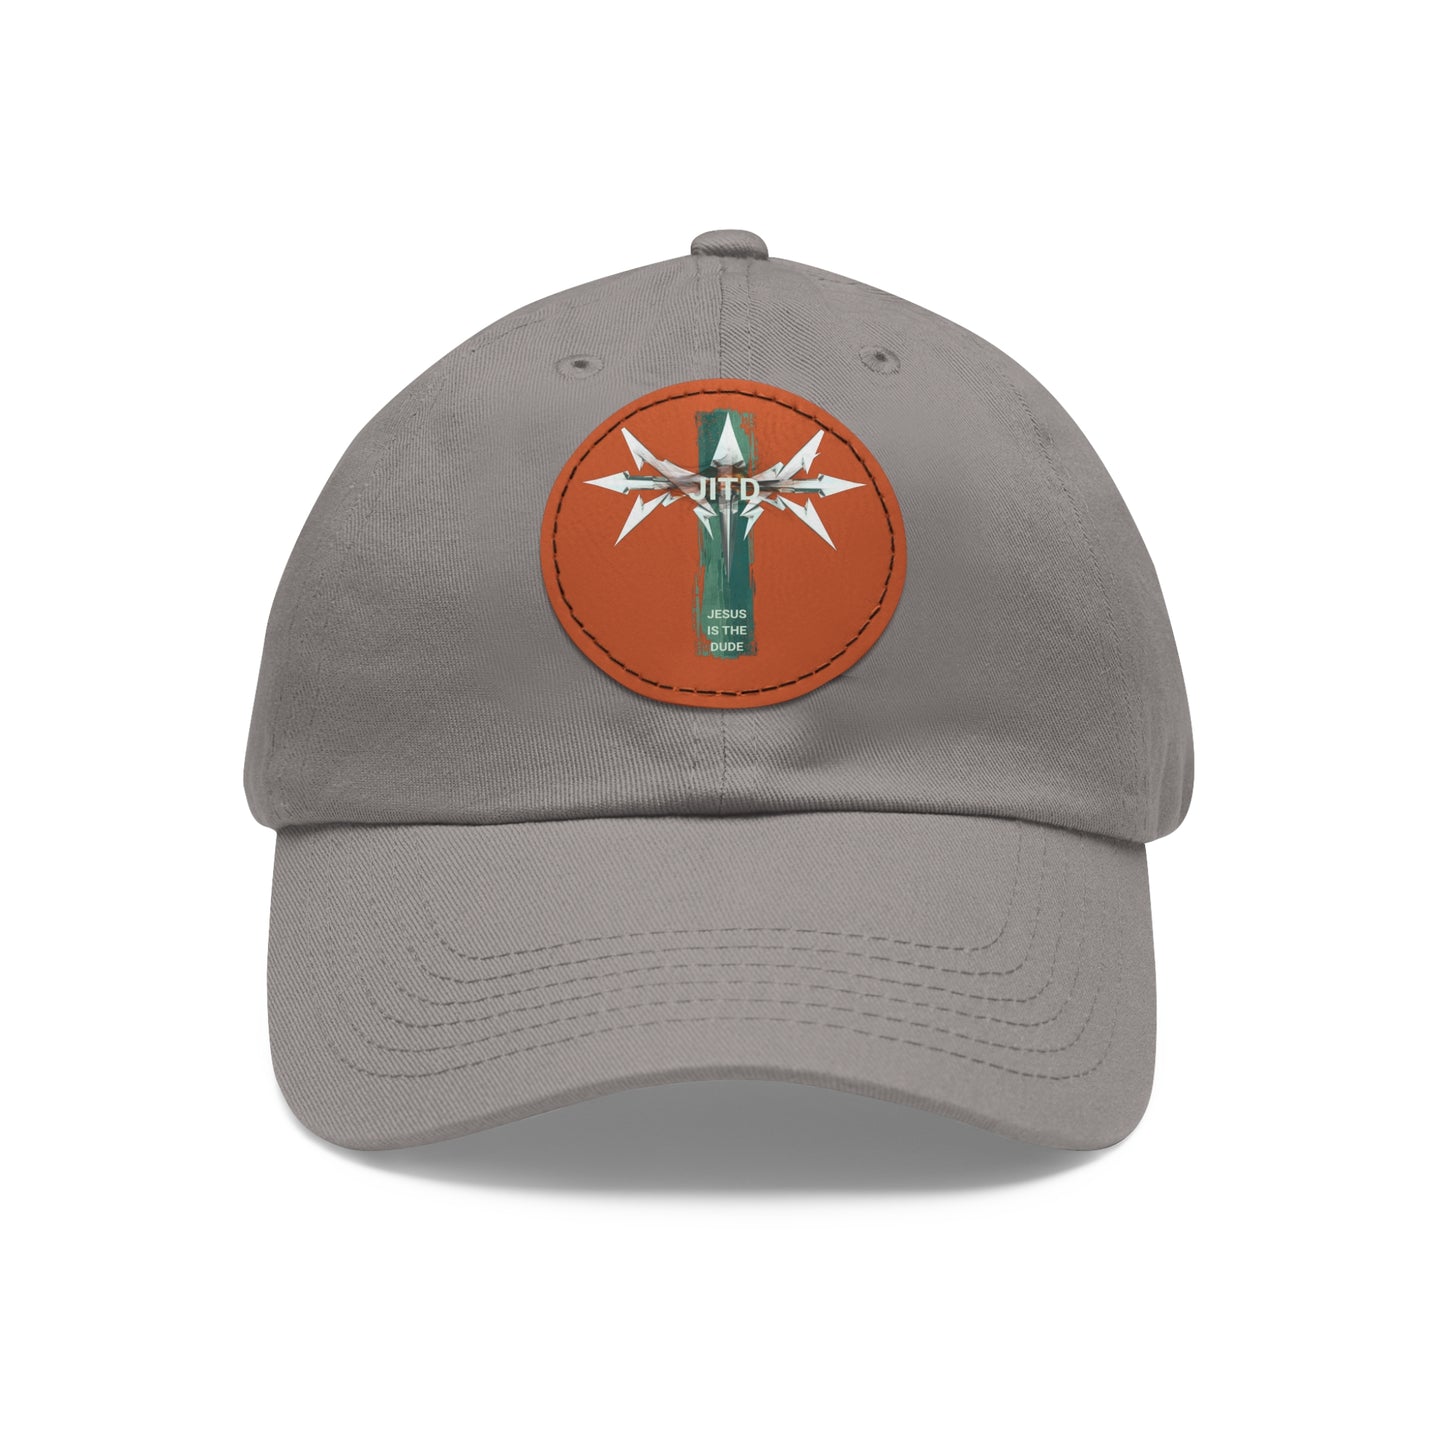 JITD SHADOW CROSS HAT WITH LEATHER PATCH